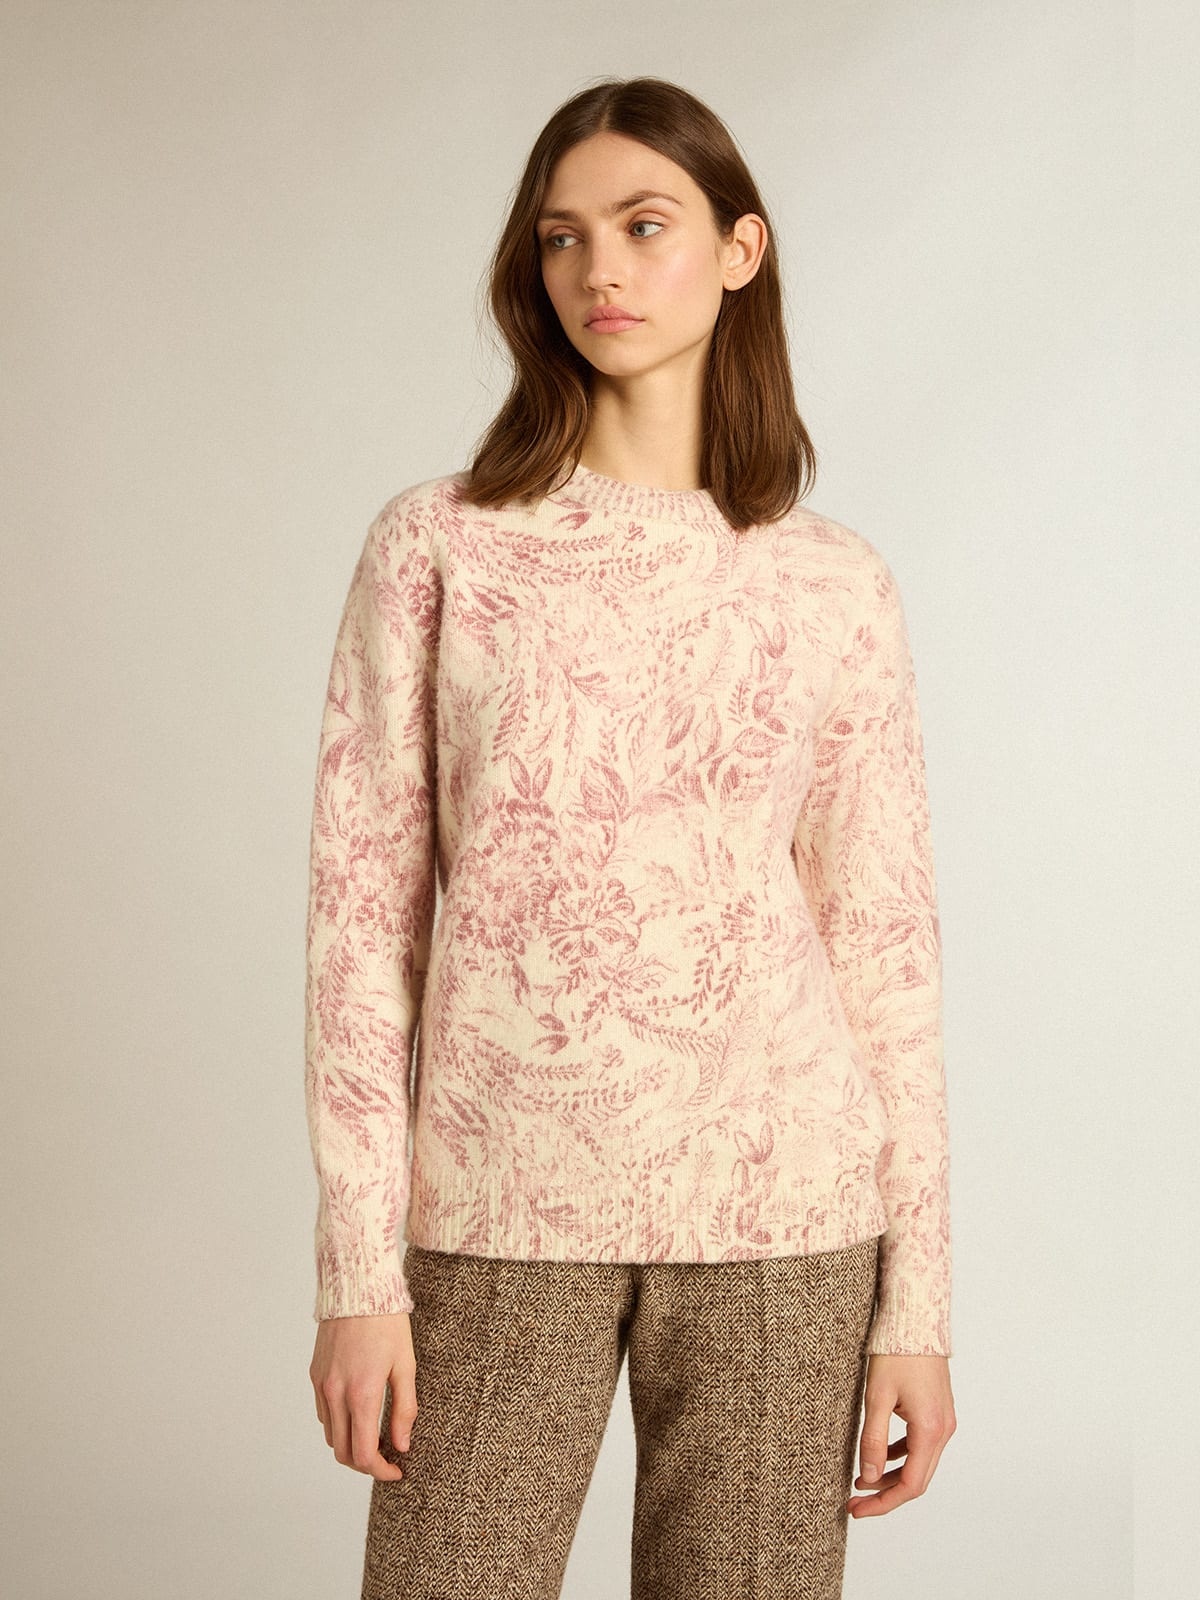 Women’s round-neck sweater in wool with all-over toile de jouy pattern - 5